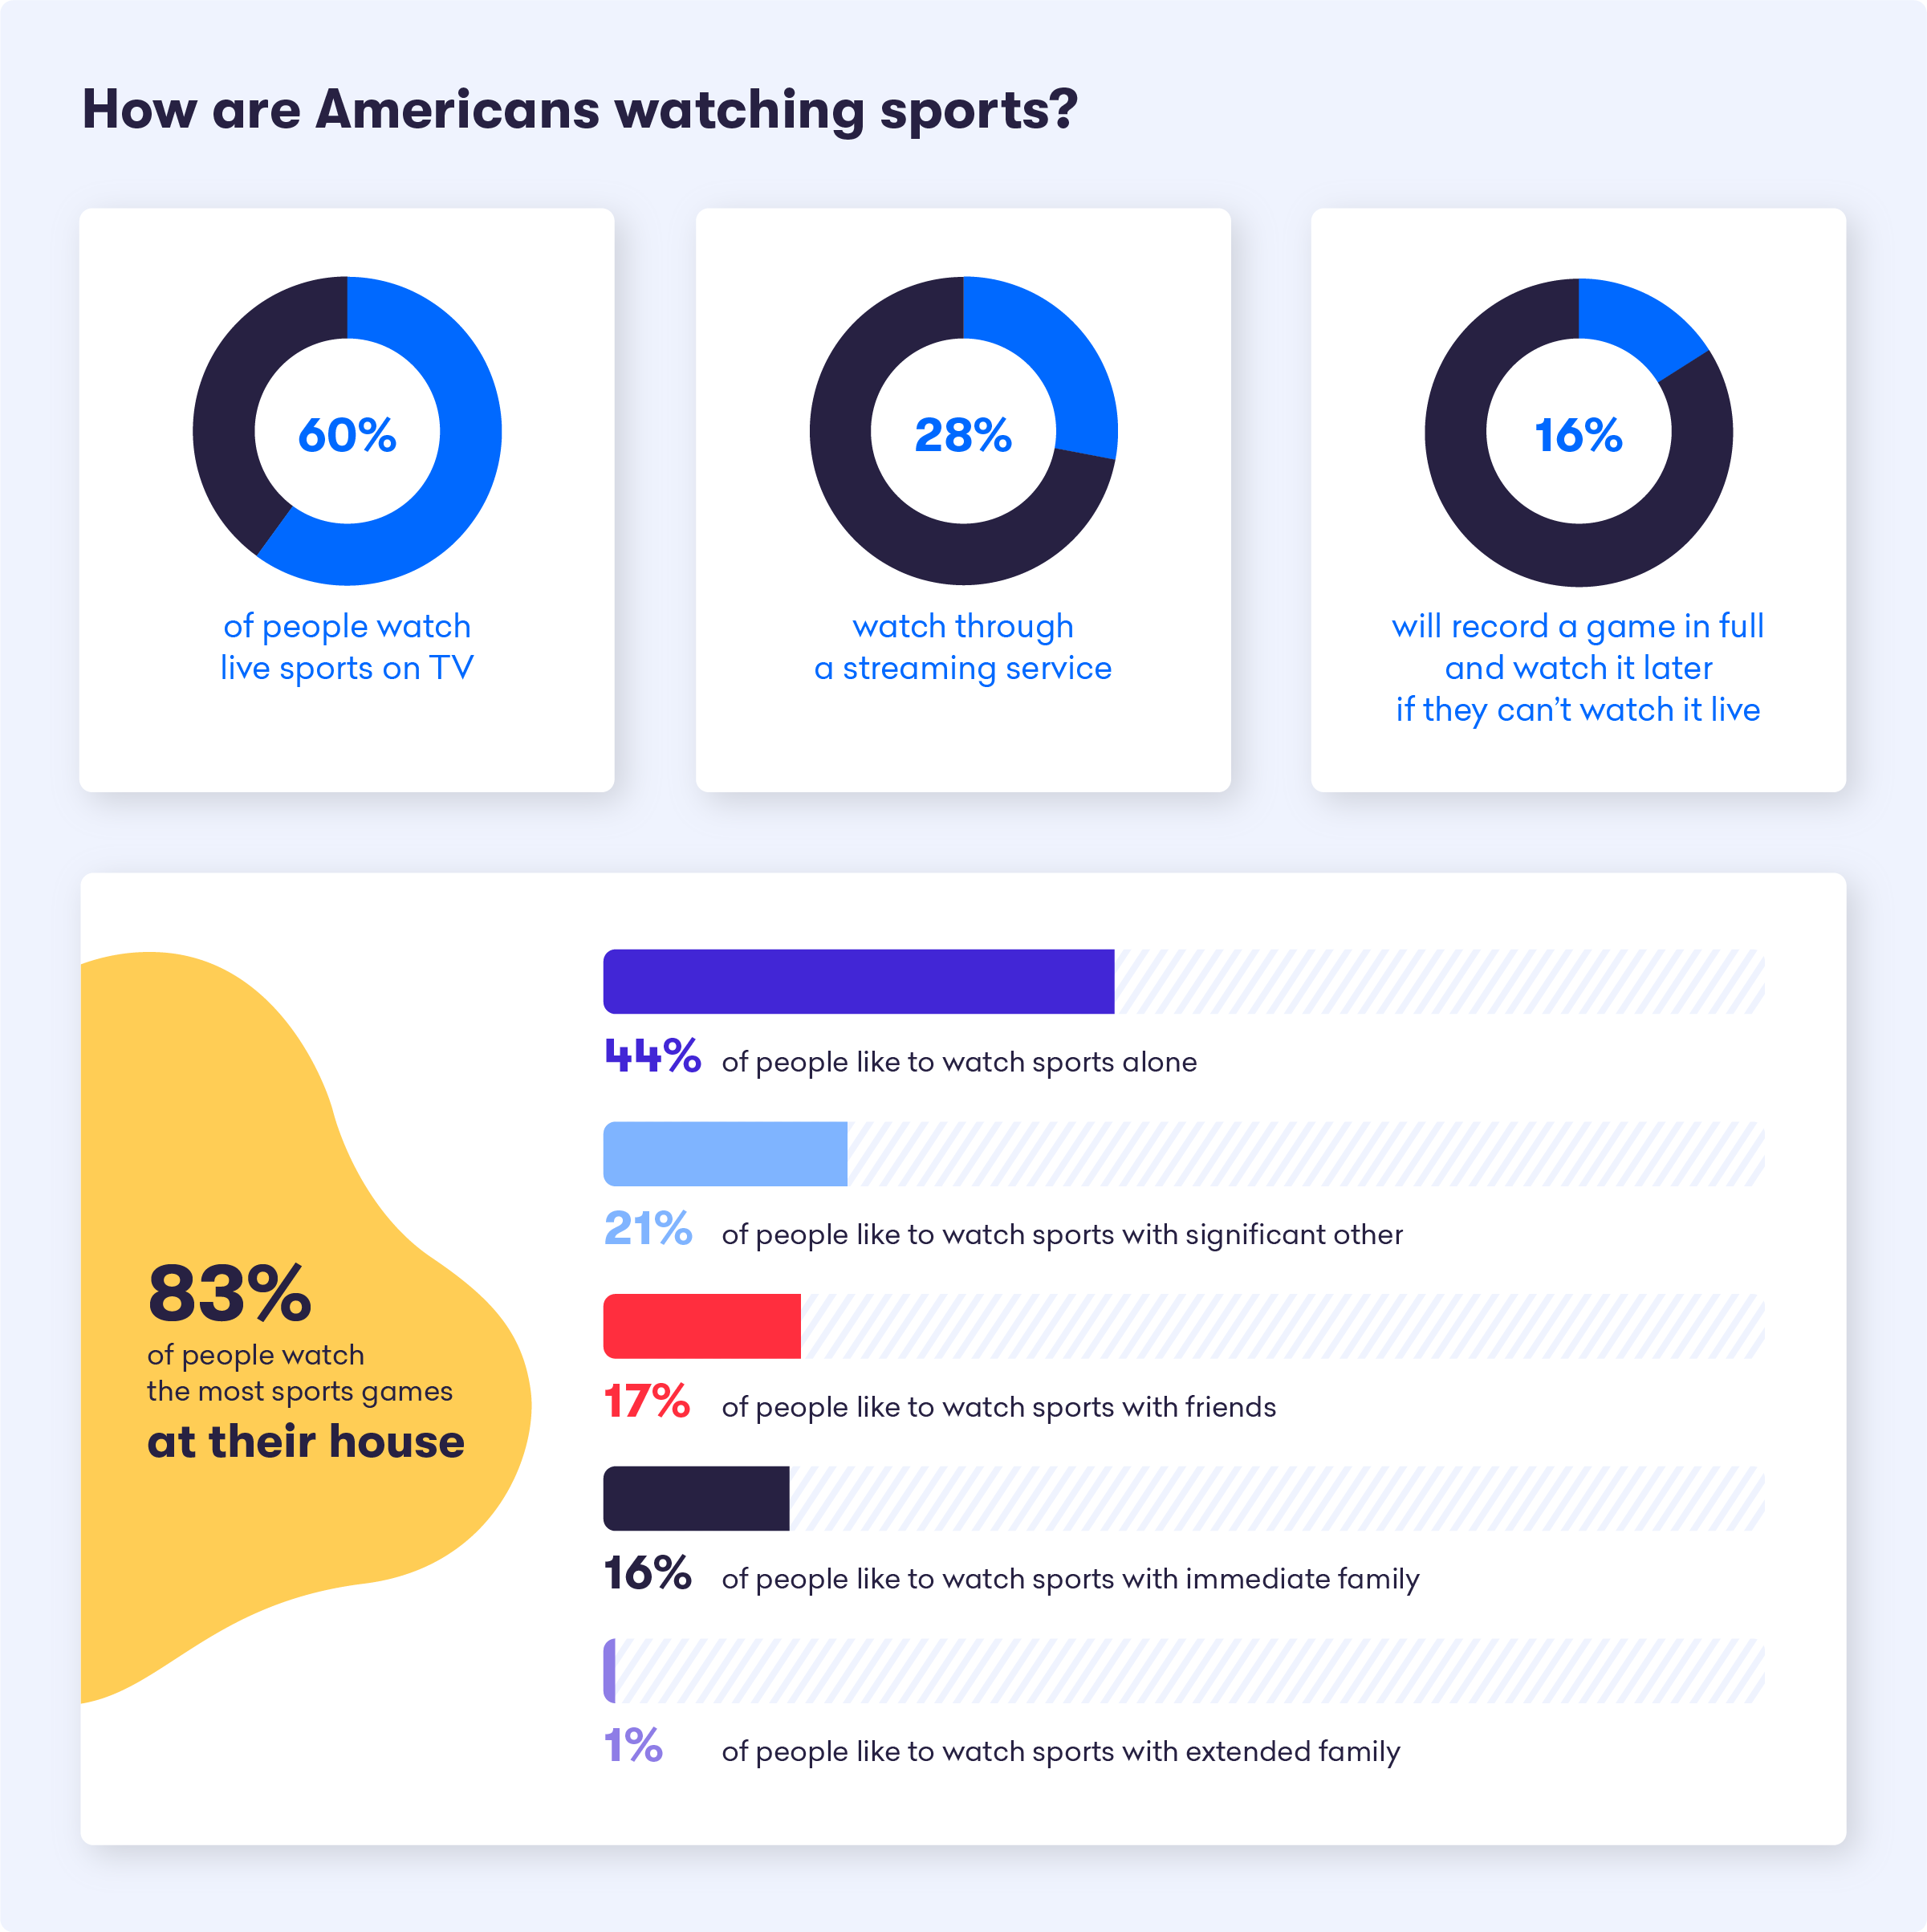 A graph showing how Americans are watching sports